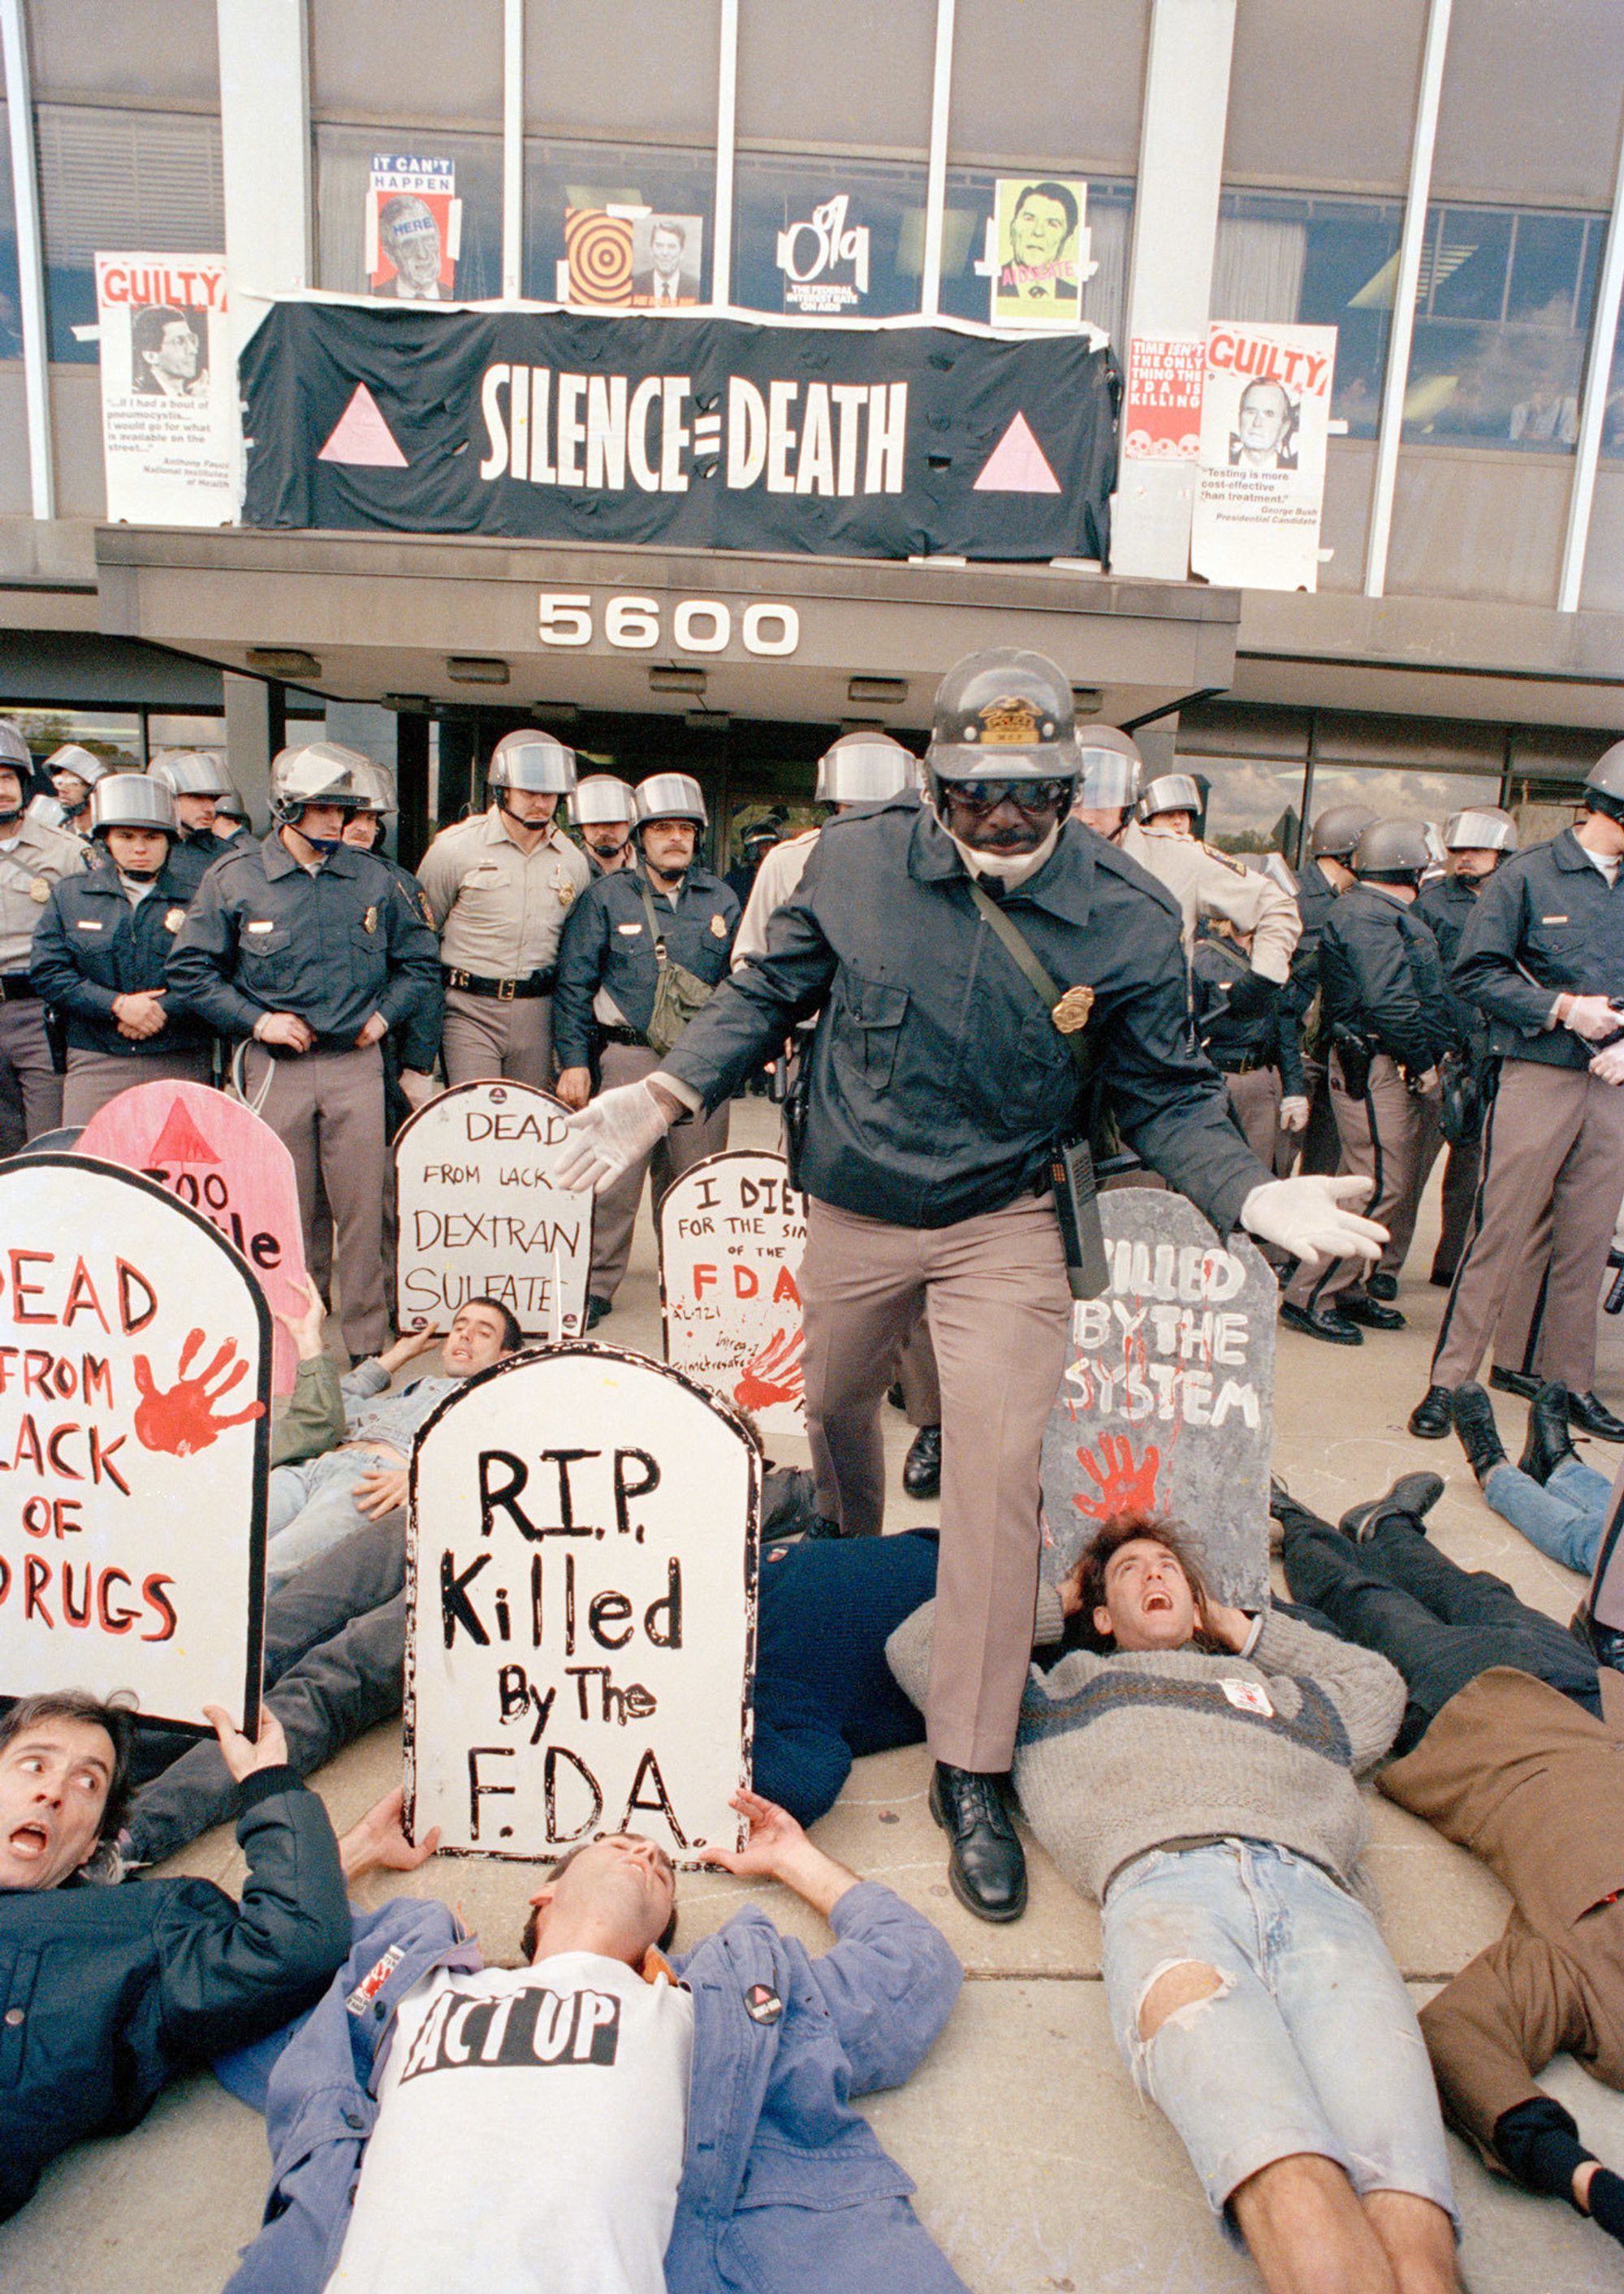 A police officer poses above several people laying on the ground with tombstones they've drawn protesting the FDA.